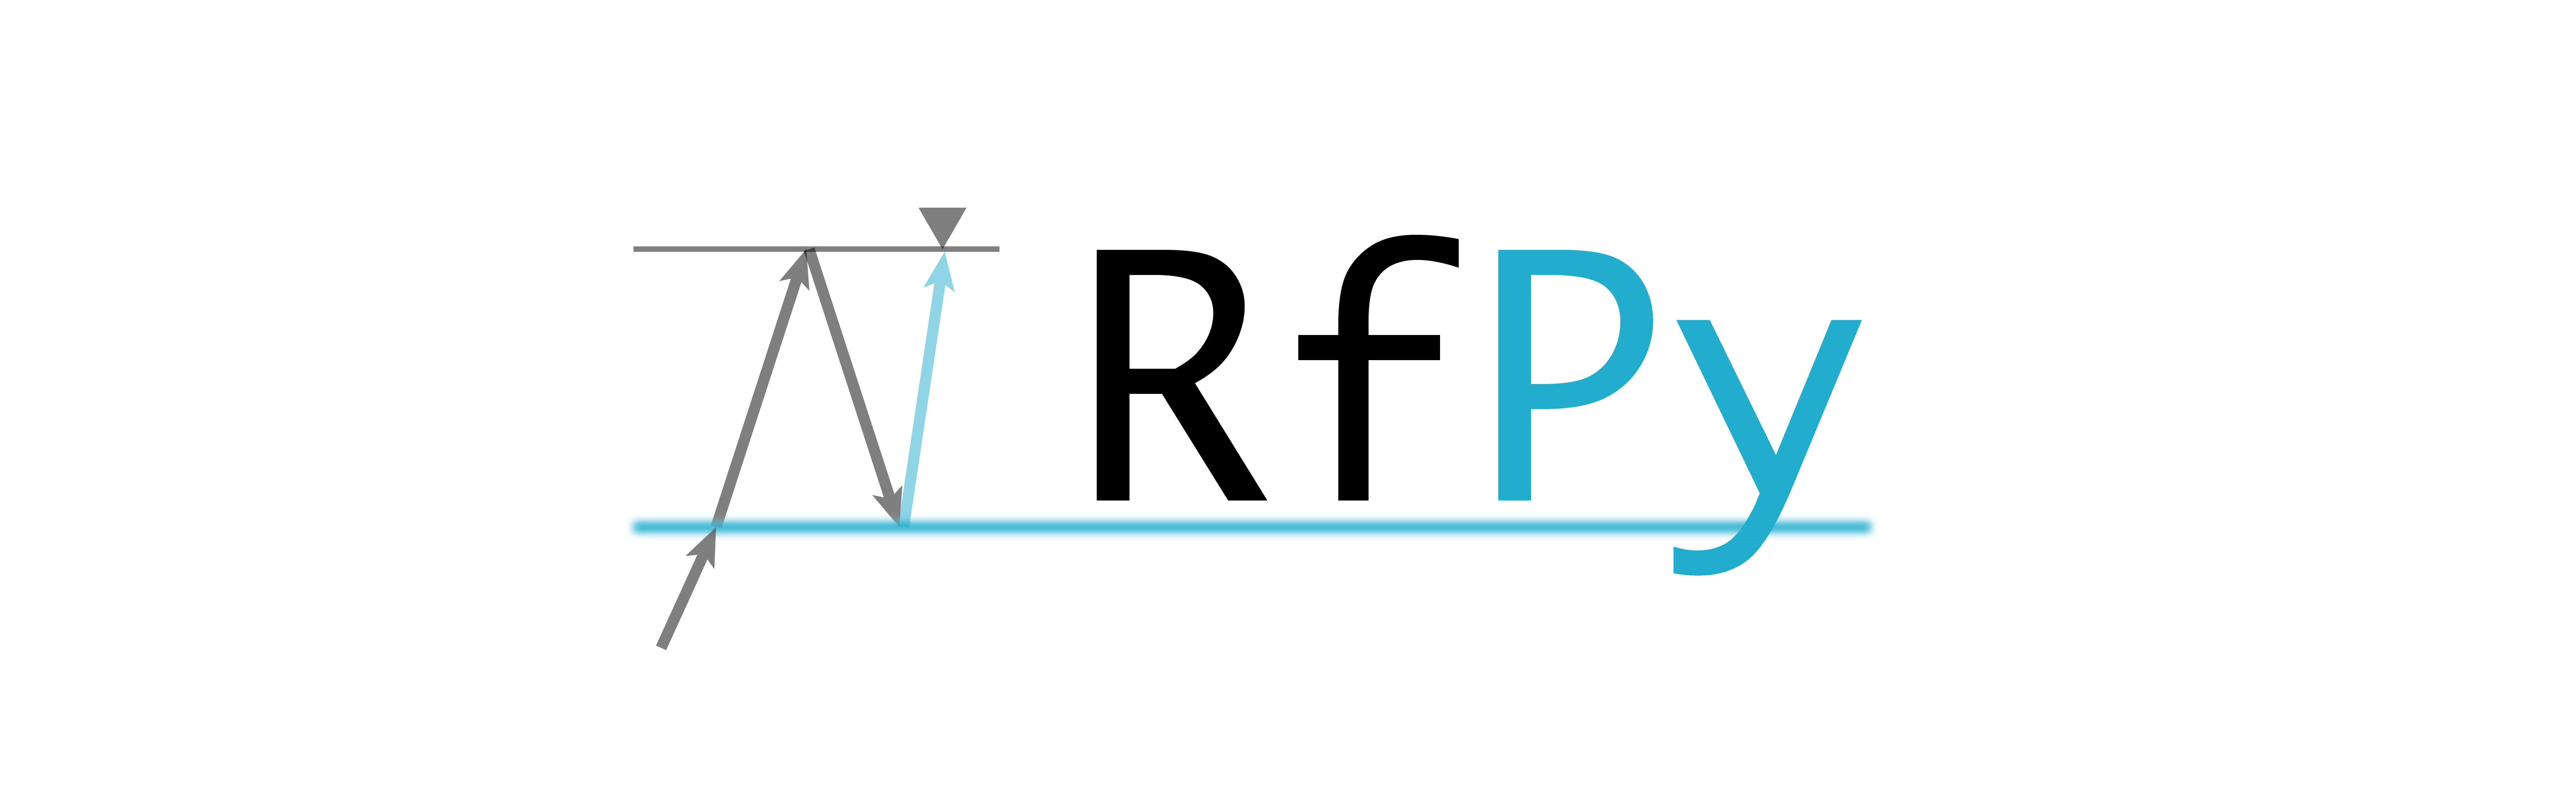 _images/RfPy_logo.png